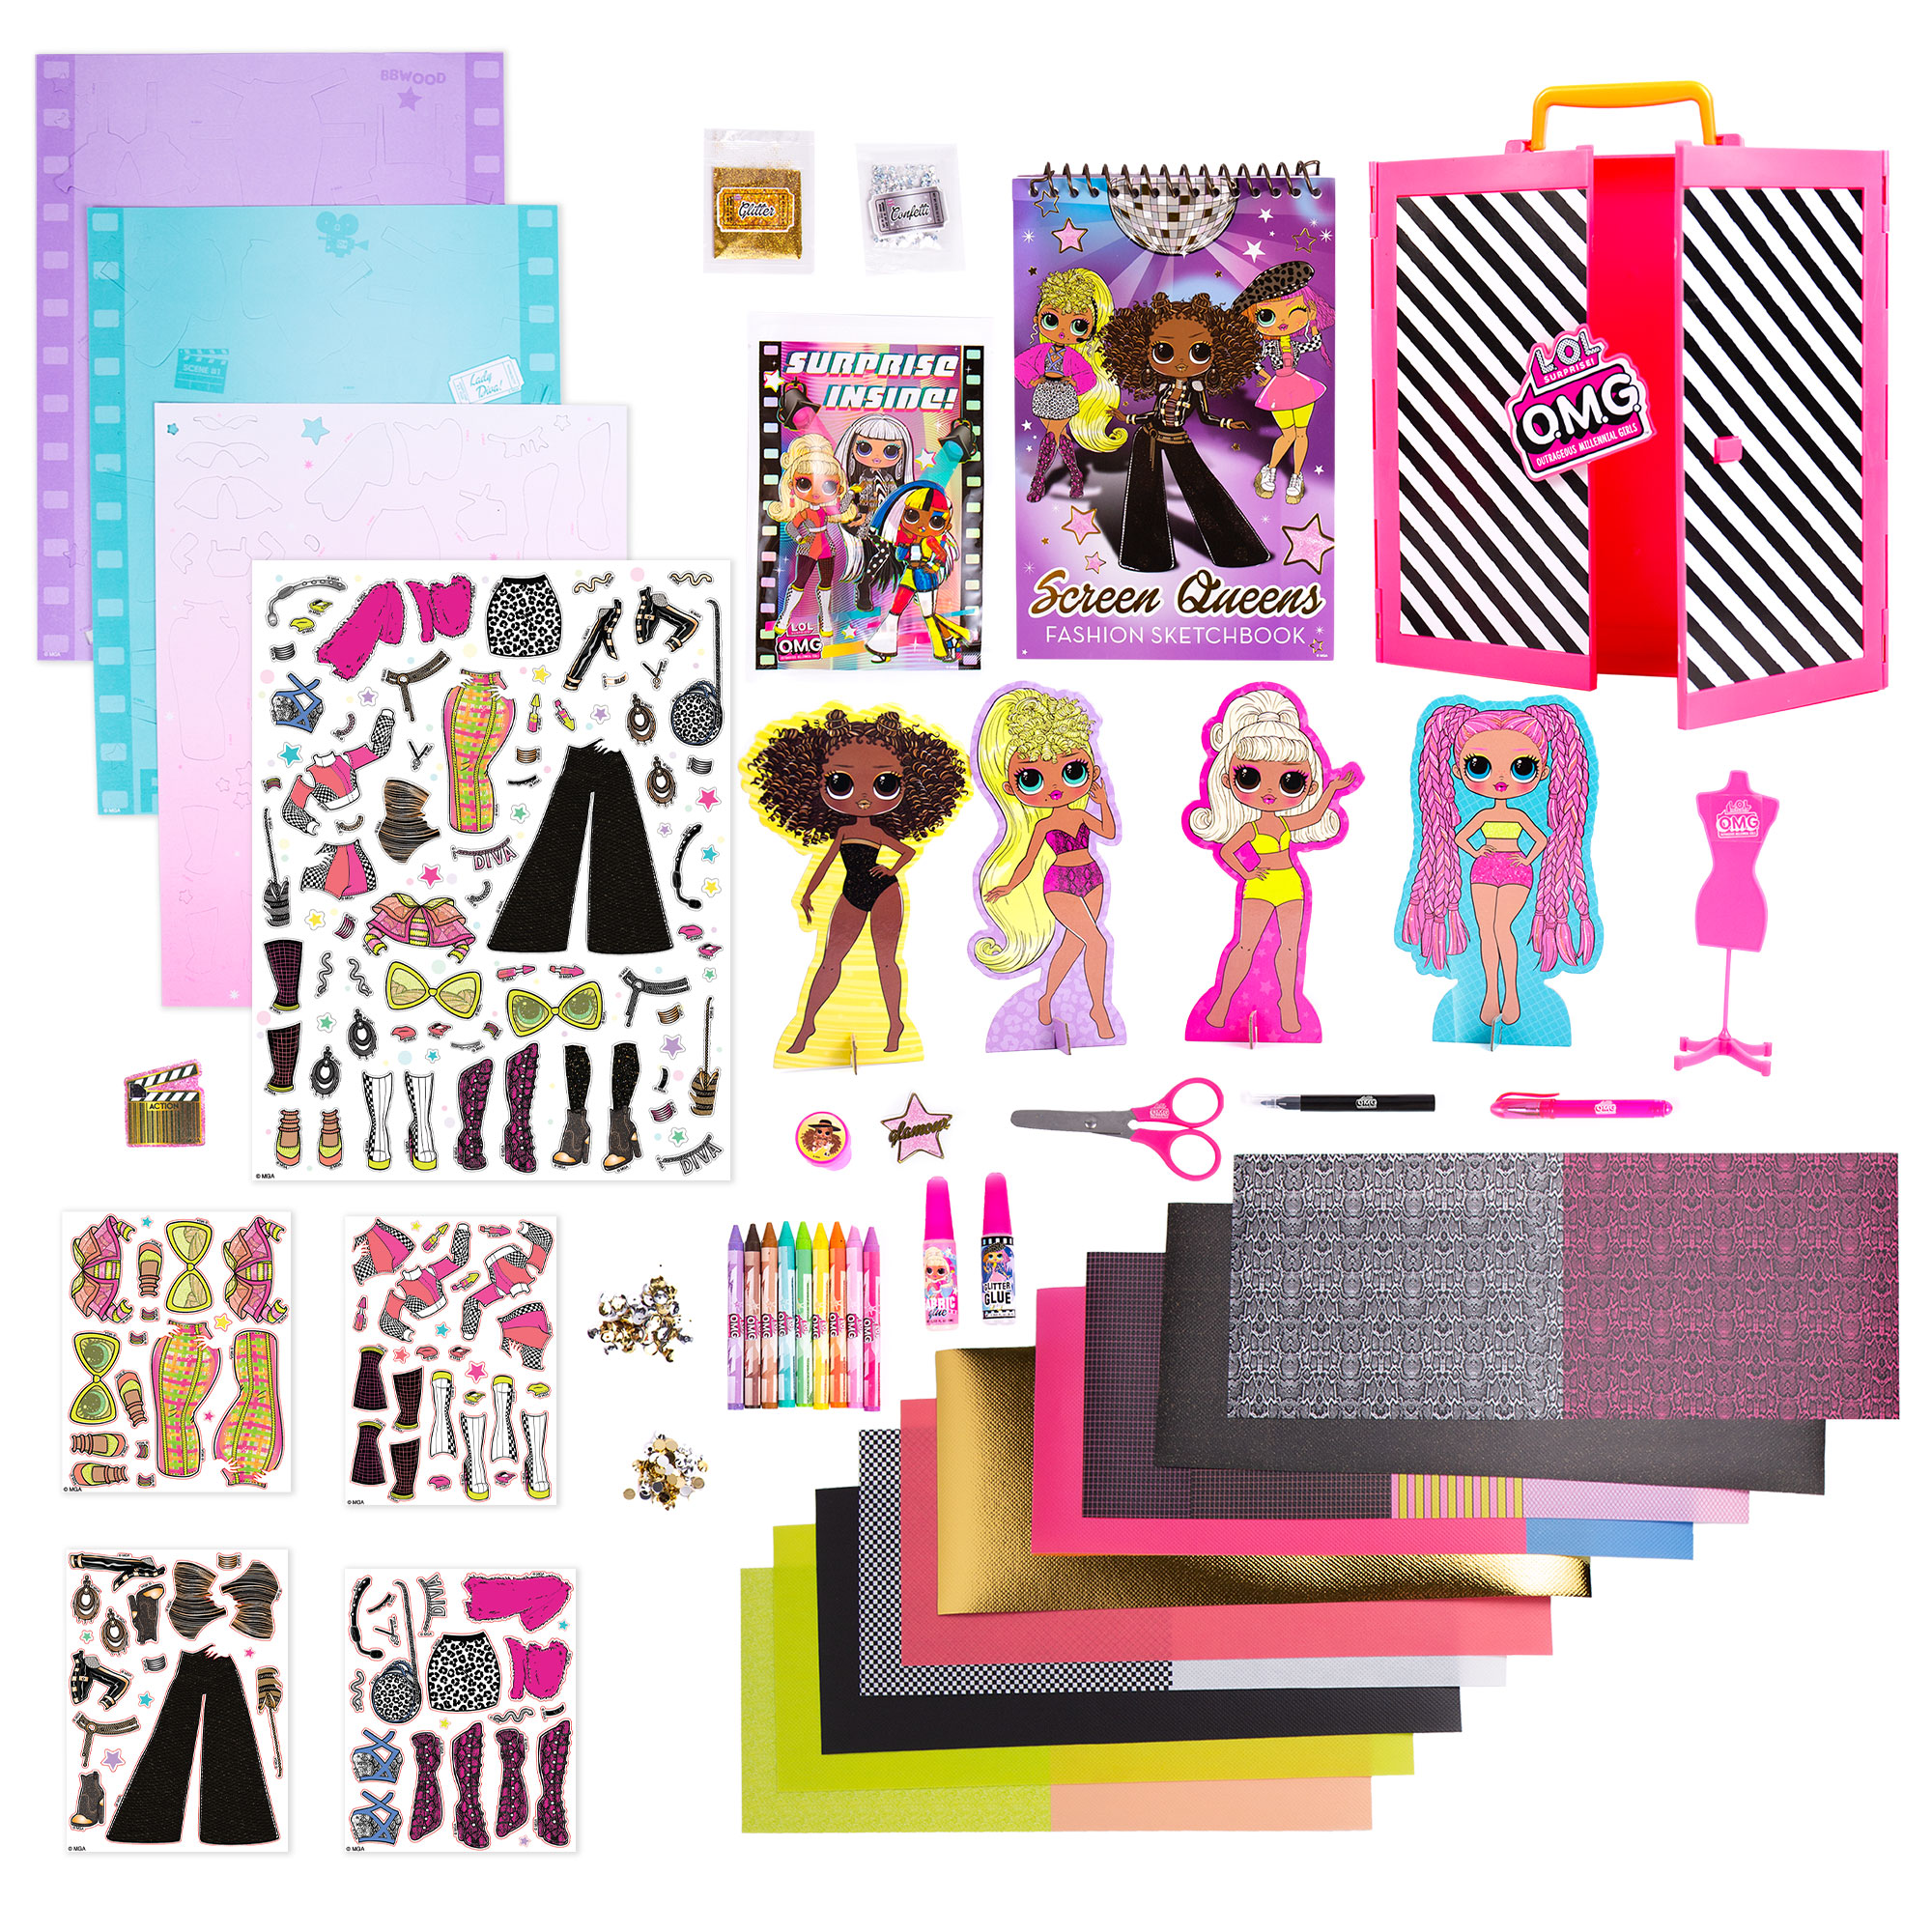 L.O.L. Surprise! O.M.G. Ultimate Fashion Designer, Double Feature Series, Decorate 4 Die-Cut Dolls With 300+ Accessories, 5 Surprises Inside, Includes Reusable Runway Case - image 2 of 5